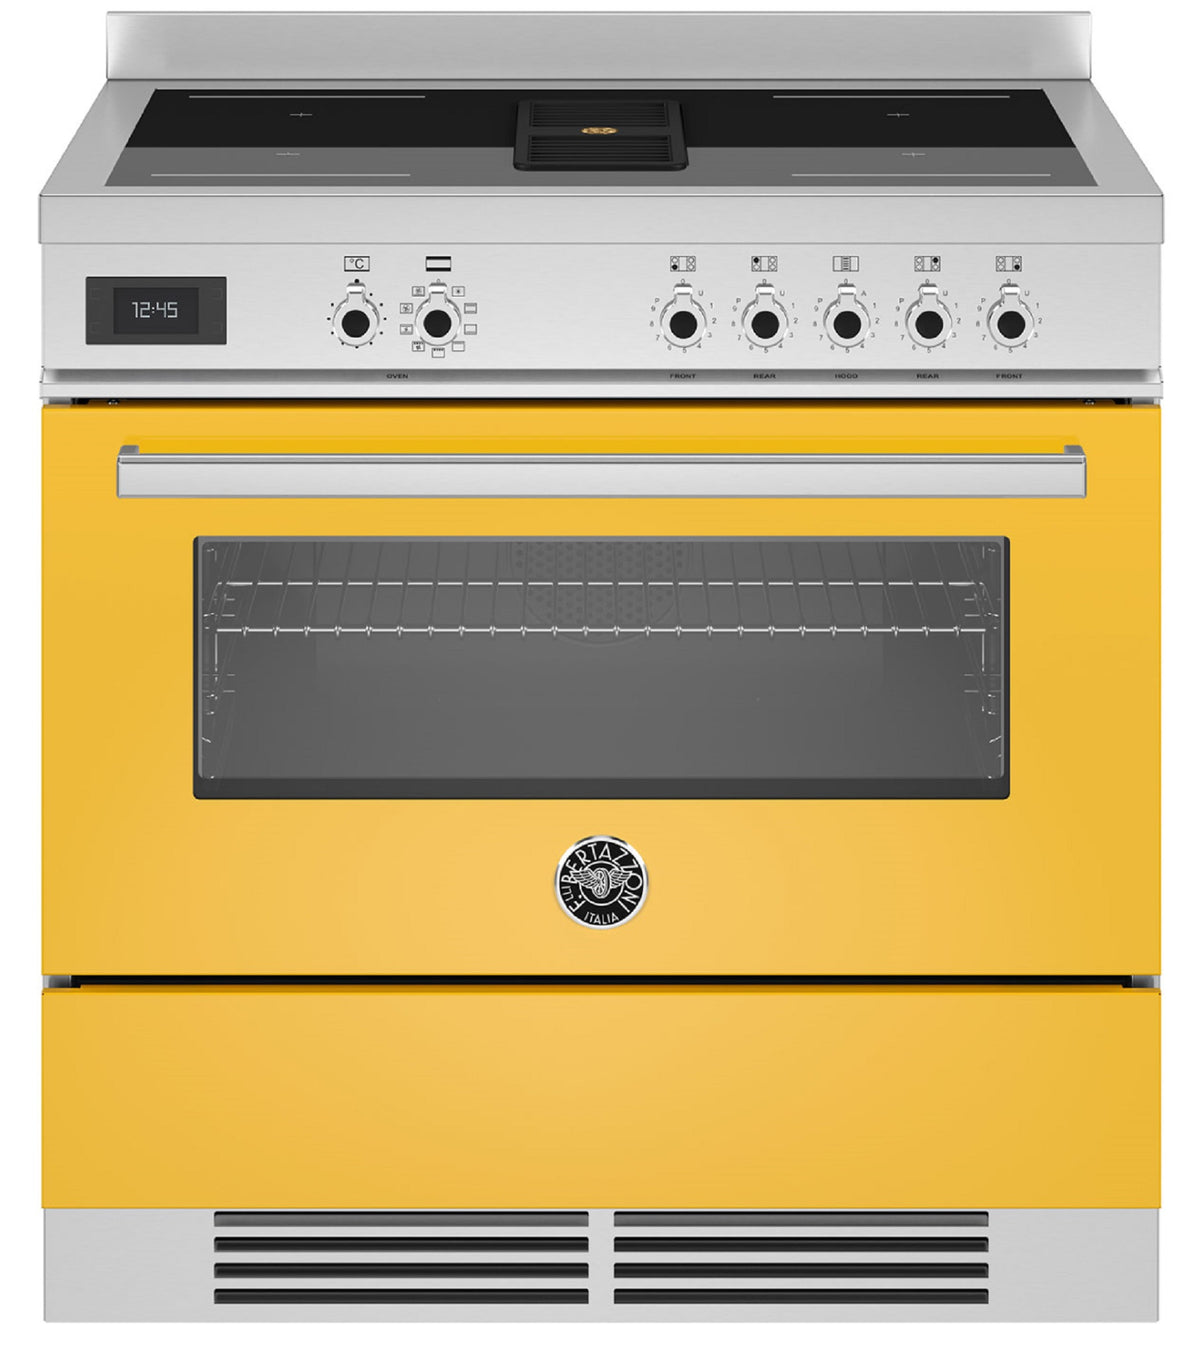 BERTAZZONI PROCH94I1EGIT 90cm Electric Oven 5 Zone Induction Hob with in-built Extractor Range Cooker in Yellow